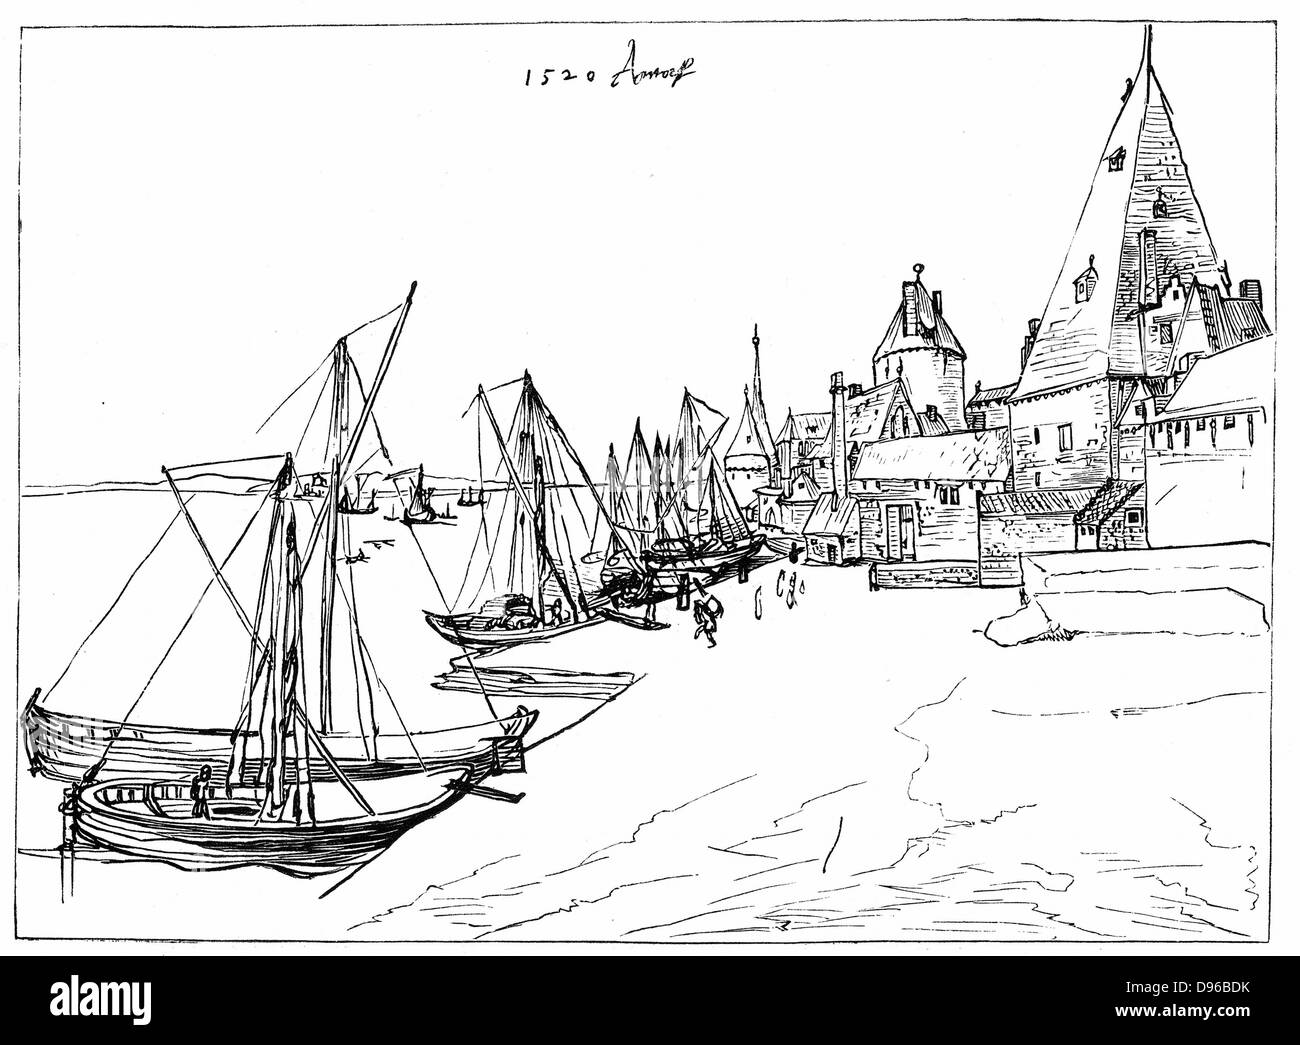 Port of Antwerp (Anvers) in 1520. After drawing by Albrecht Durer. Stock Photo